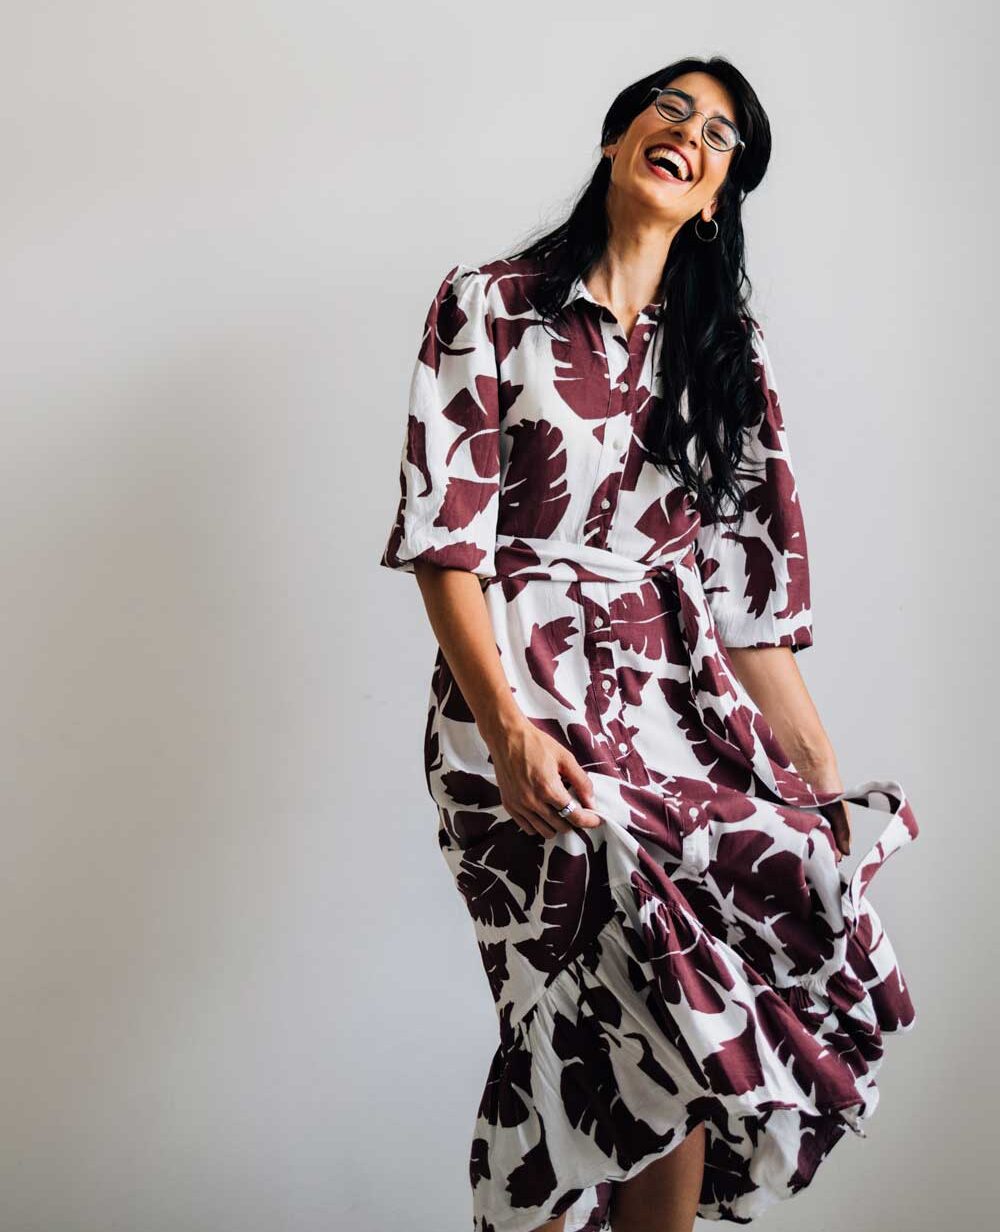 Awakened school participants support photo of happy woman feeling confident in patterned dress